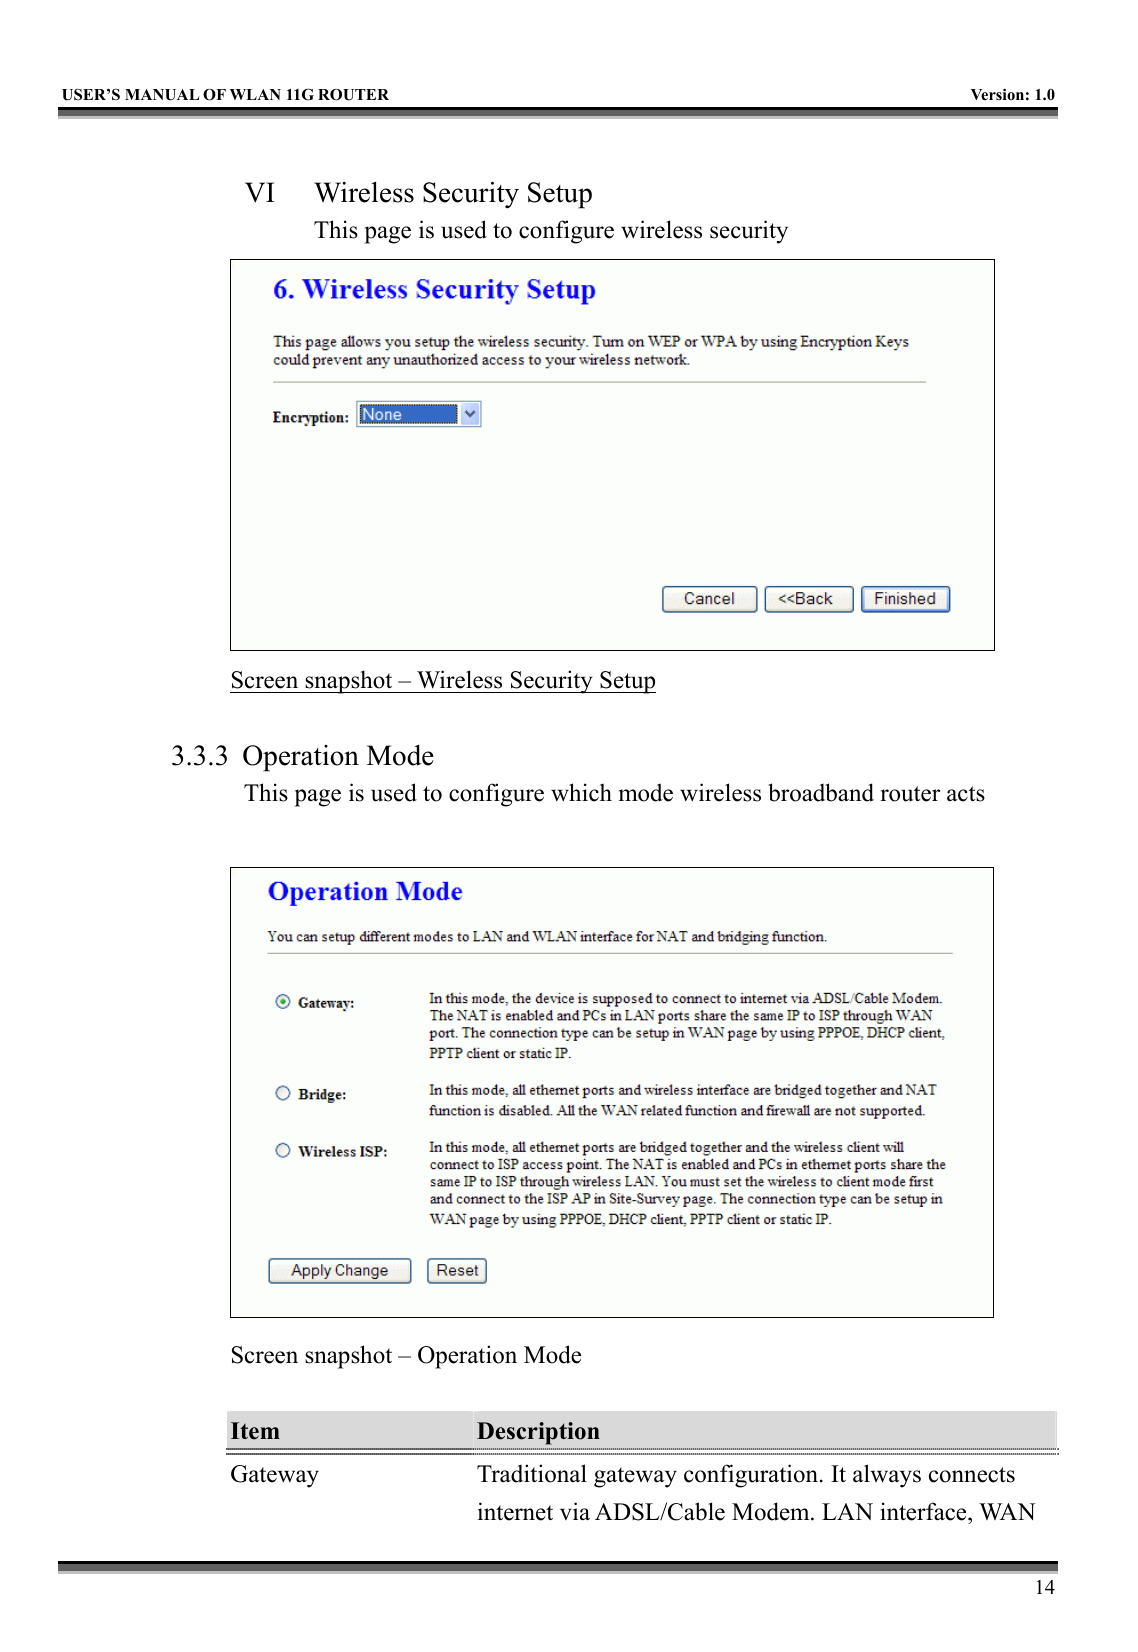   USER’S MANUAL OF WLAN 11G ROUTER    Version: 1.0     14  VI  Wireless Security Setup This page is used to configure wireless security  Screen snapshot – Wireless Security Setup  3.3.3 Operation Mode This page is used to configure which mode wireless broadband router acts   Screen snapshot – Operation Mode  Item  Description   Gateway  Traditional gateway configuration. It always connects internet via ADSL/Cable Modem. LAN interface, WAN 